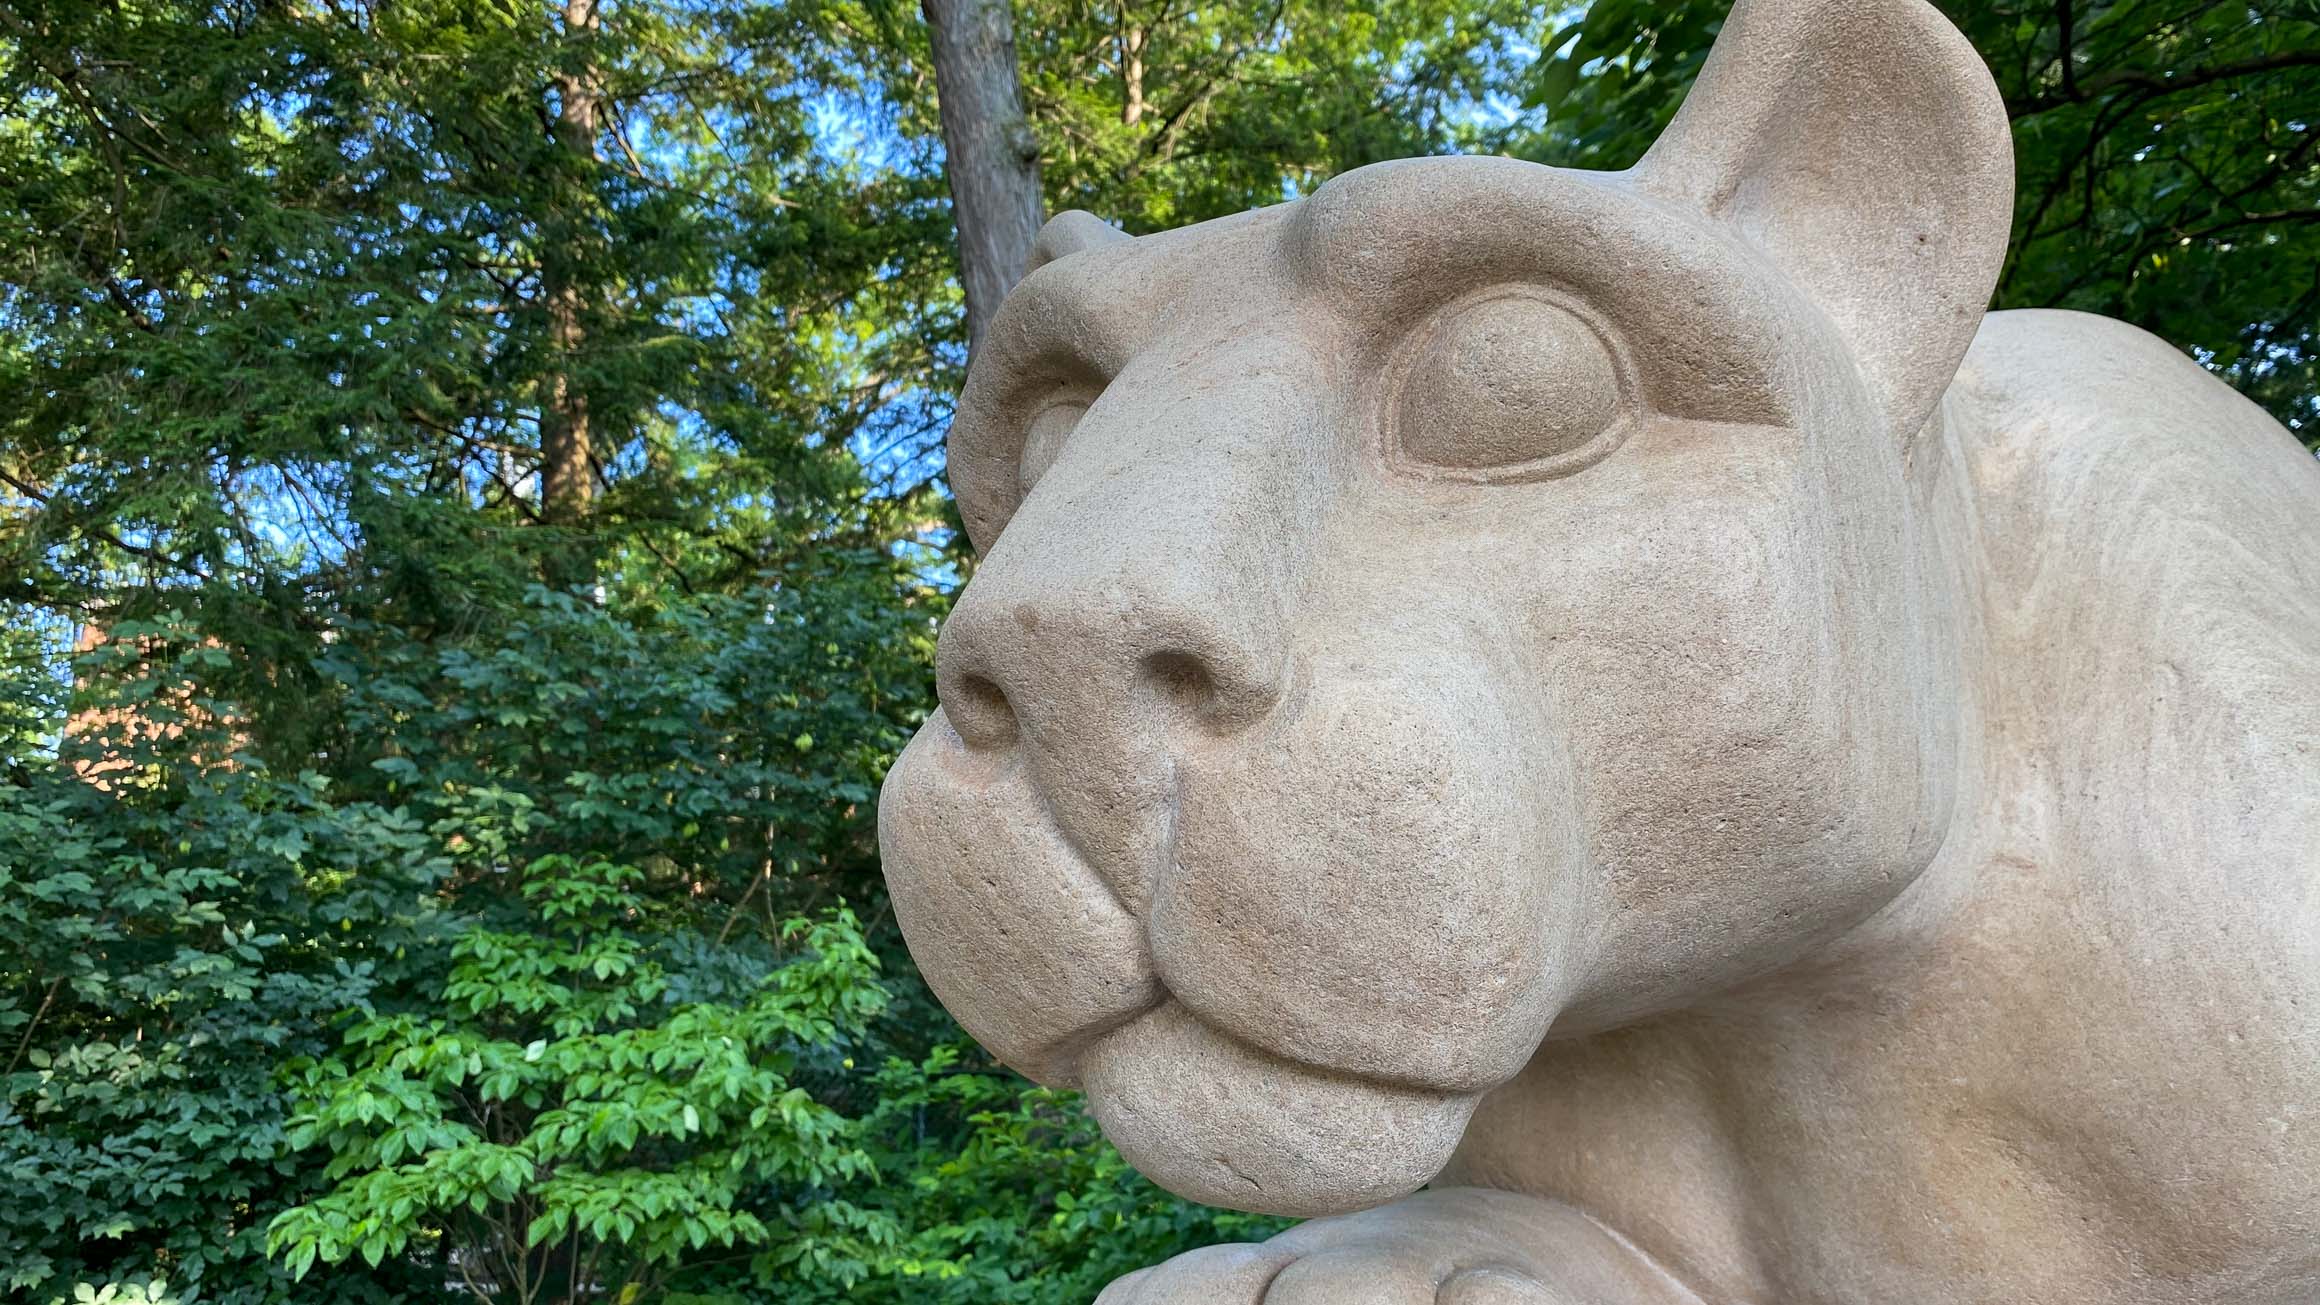 the face of the nittany lion shrine is shown